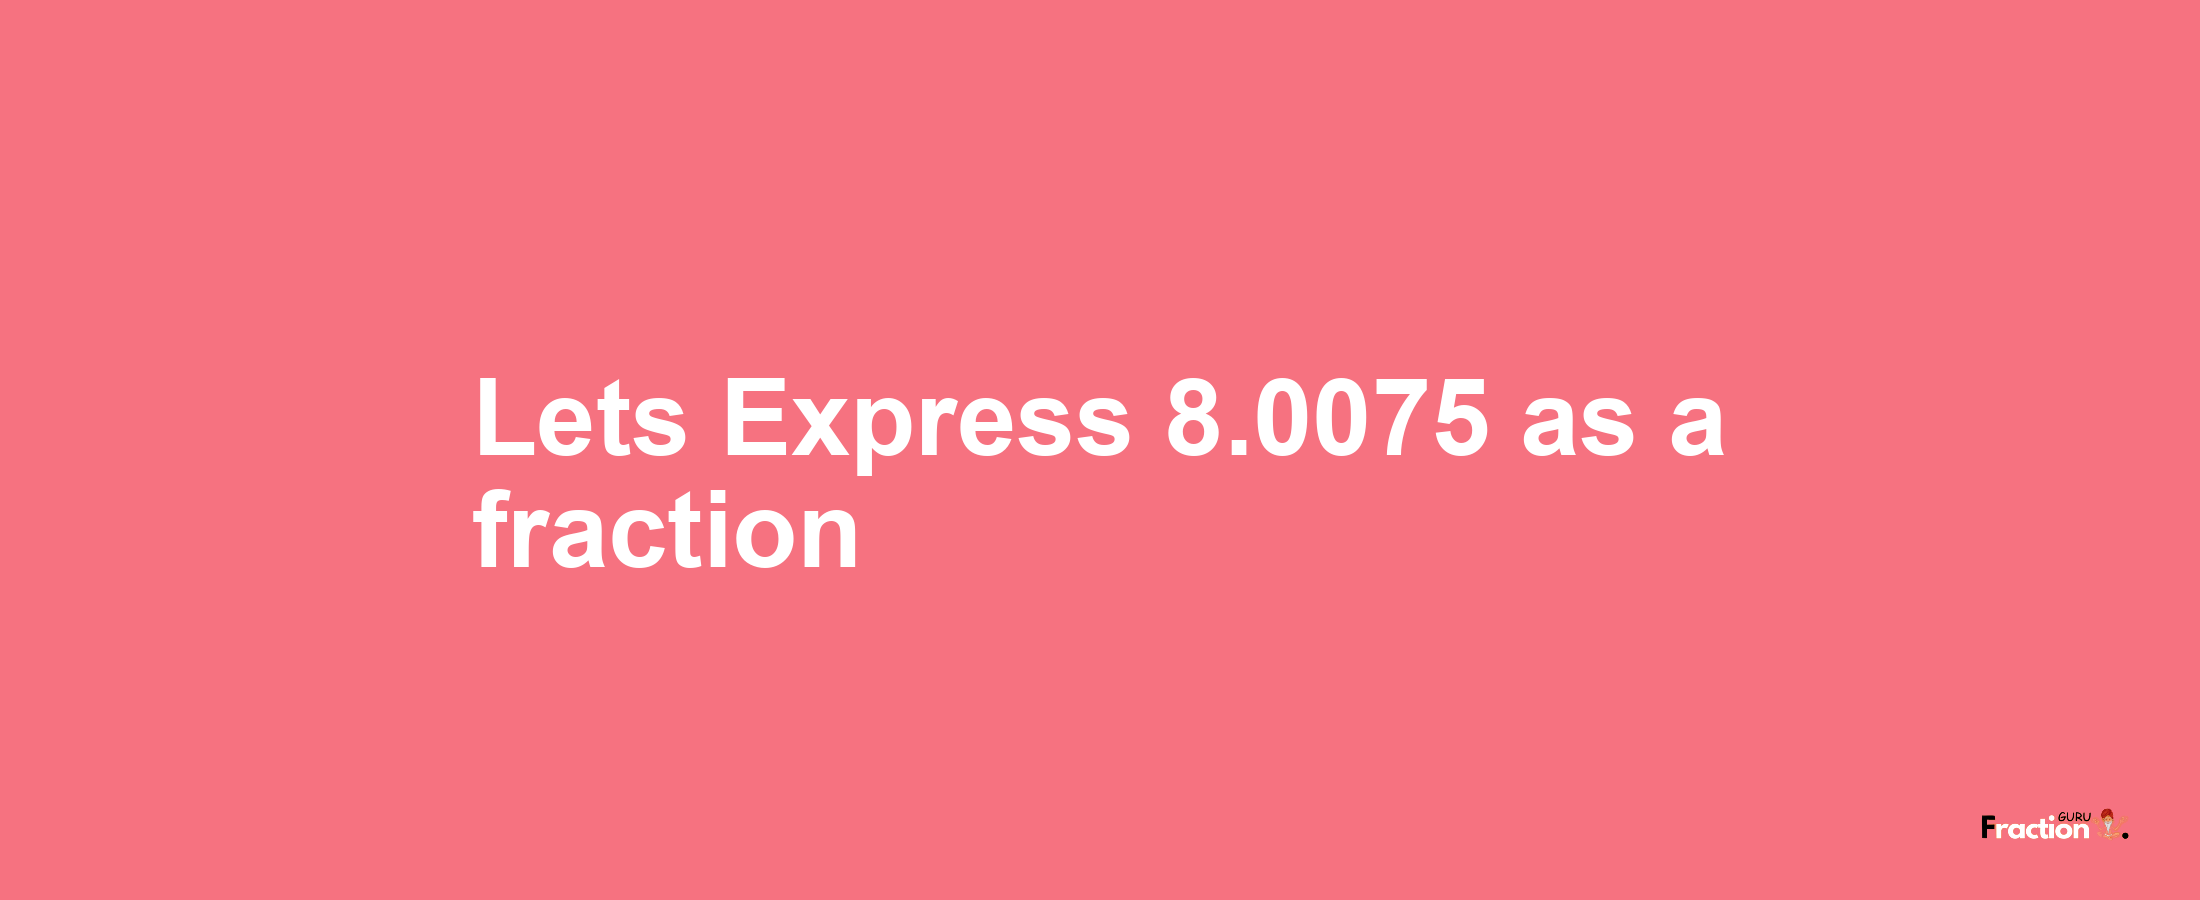 Lets Express 8.0075 as afraction